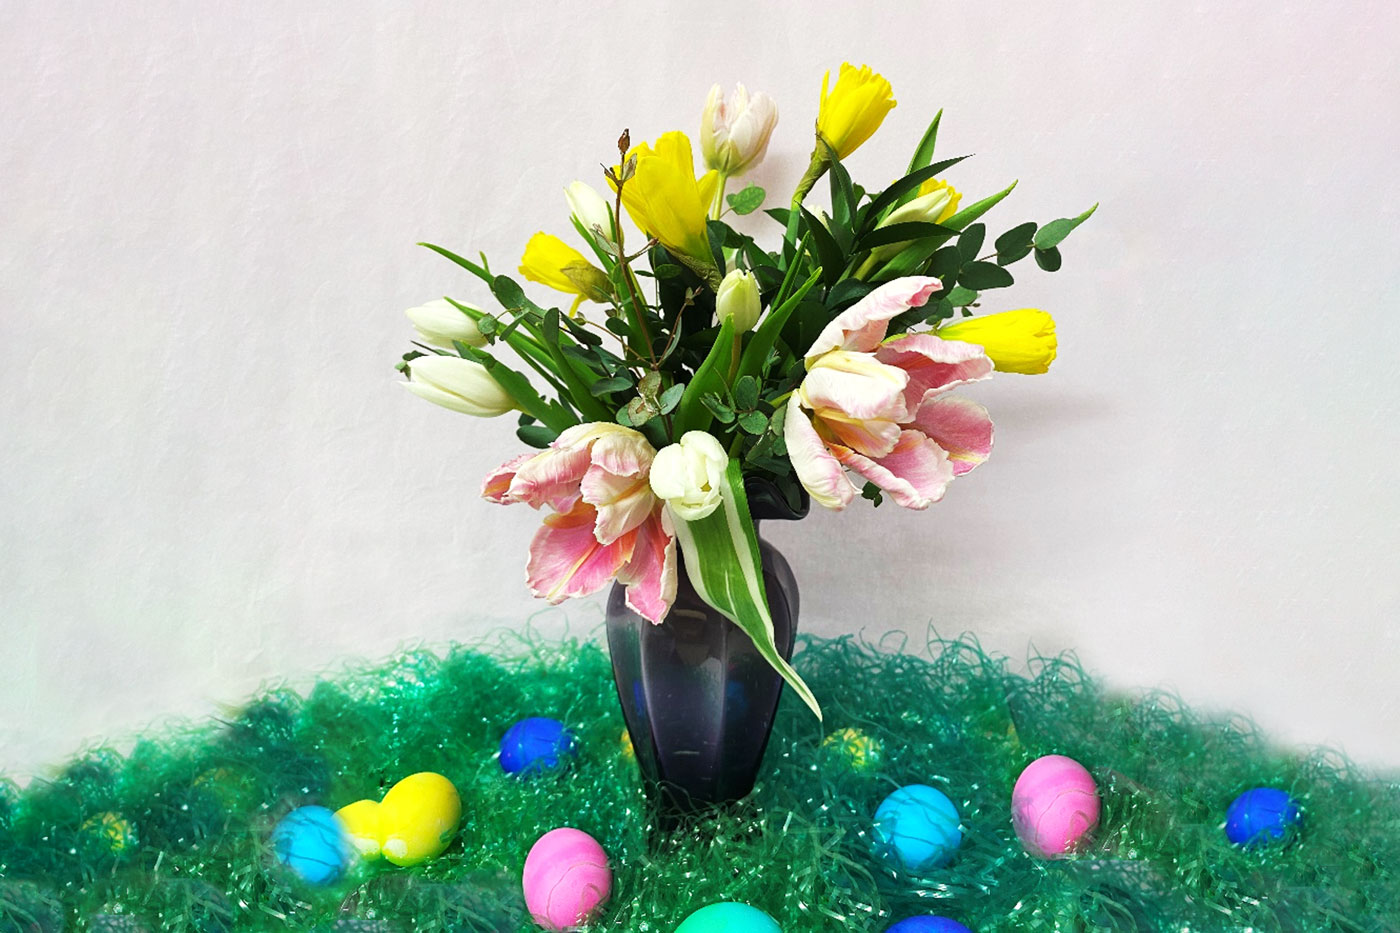 flowers in vase on table with green faux grass and colored eggs